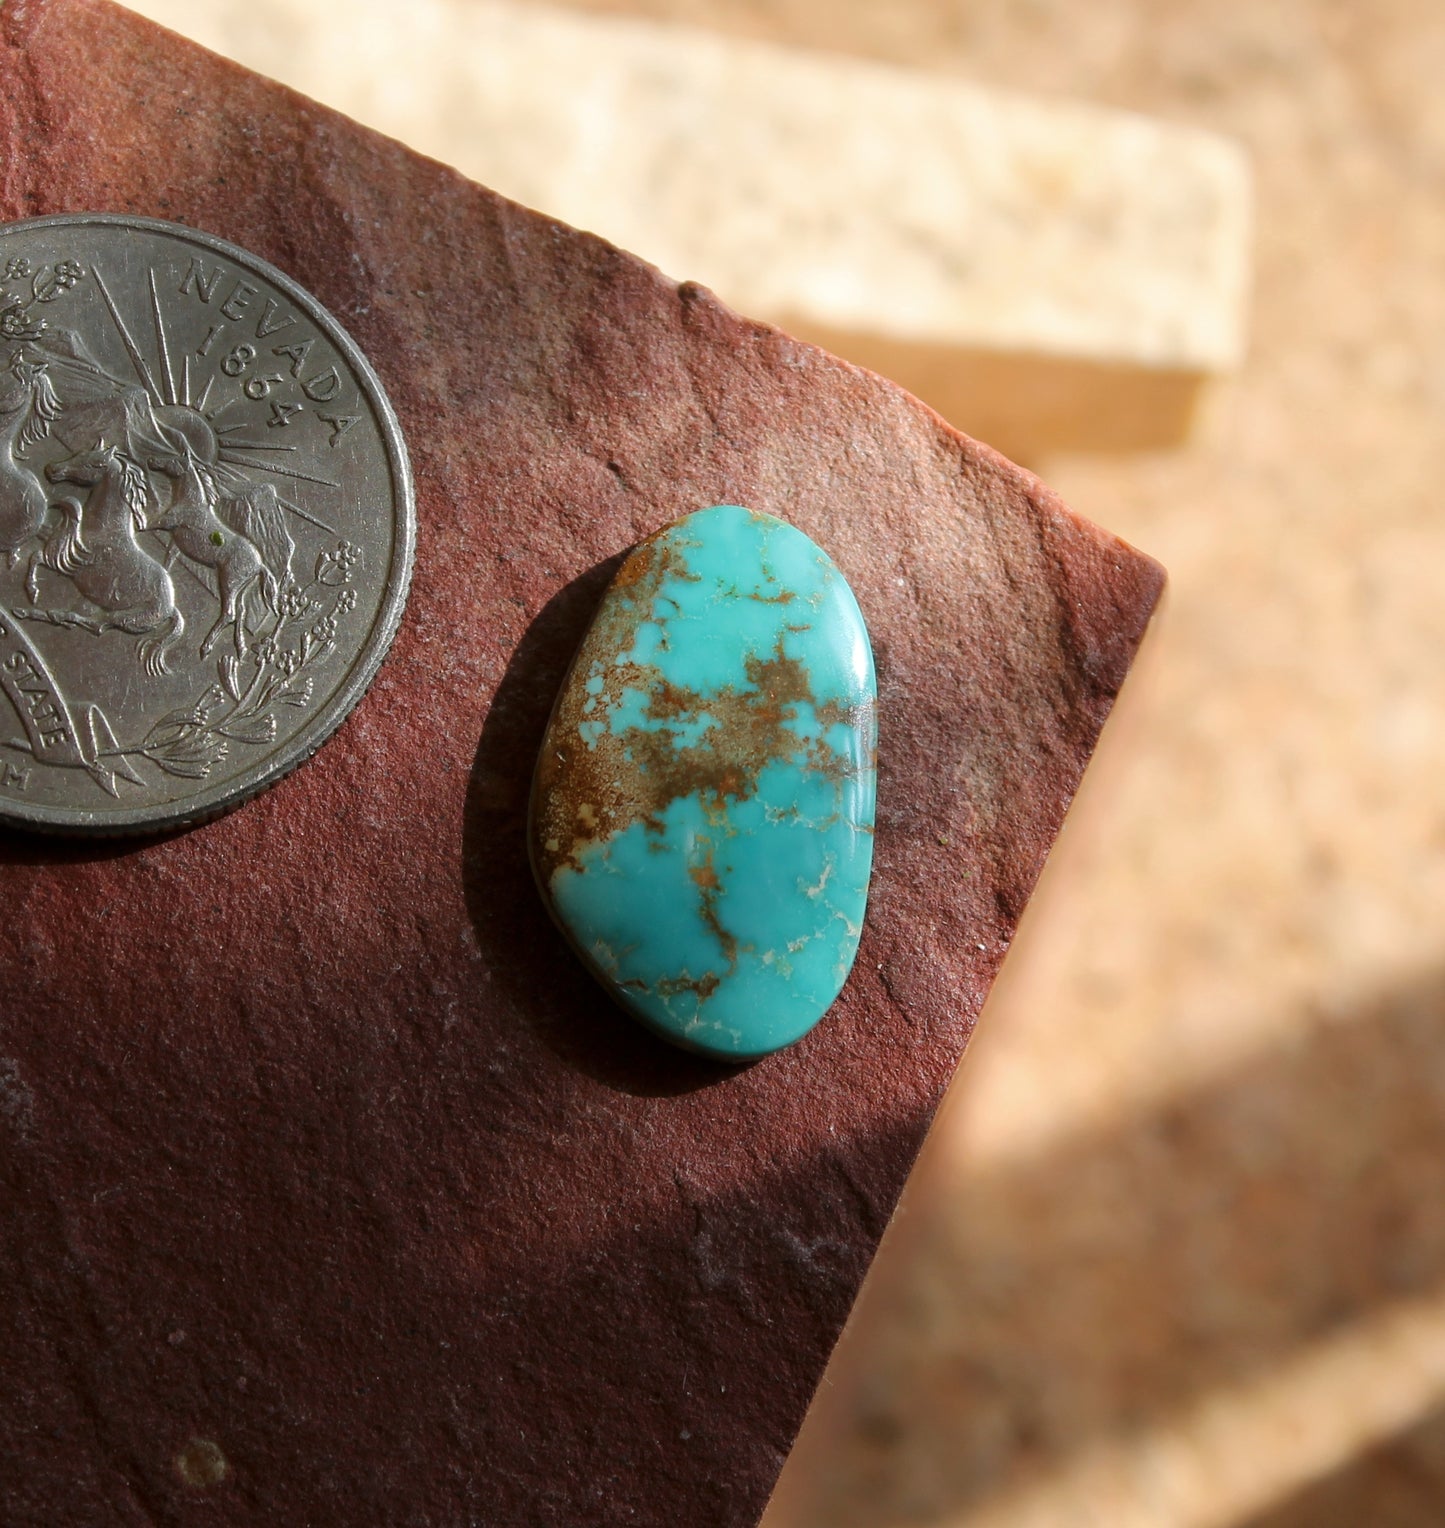 7 carat blue Stone Mountain Turquoise cabochon with red inclusions